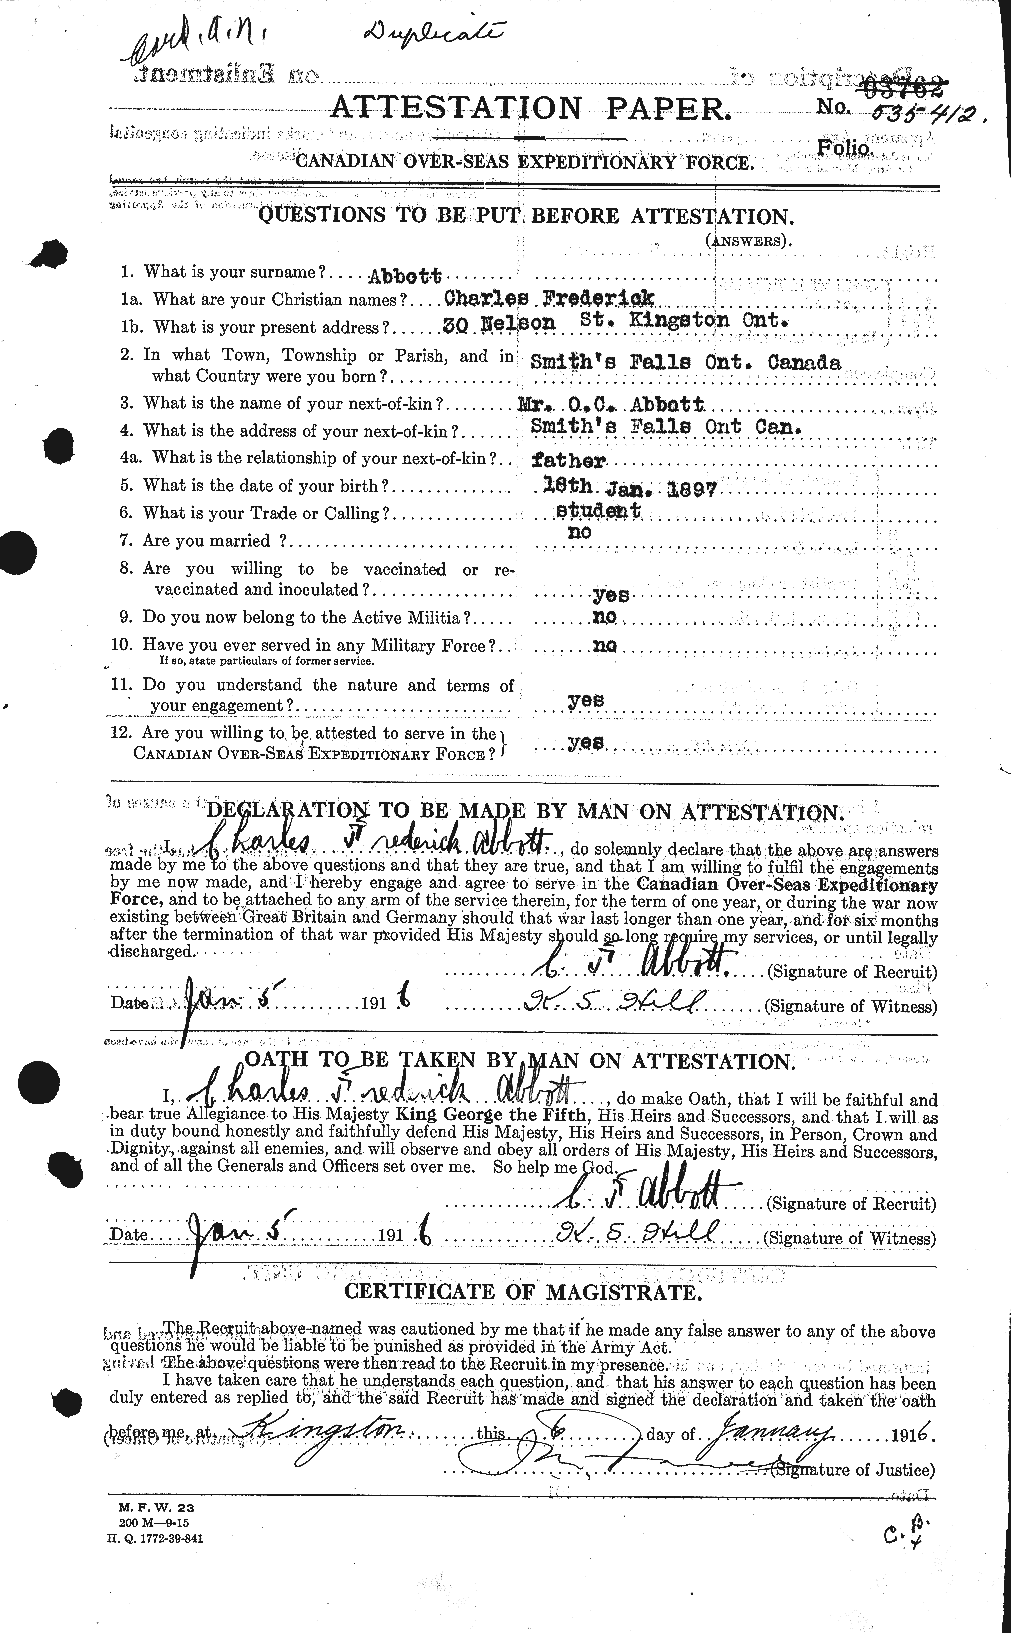 Personnel Records of the First World War - CEF 200836a